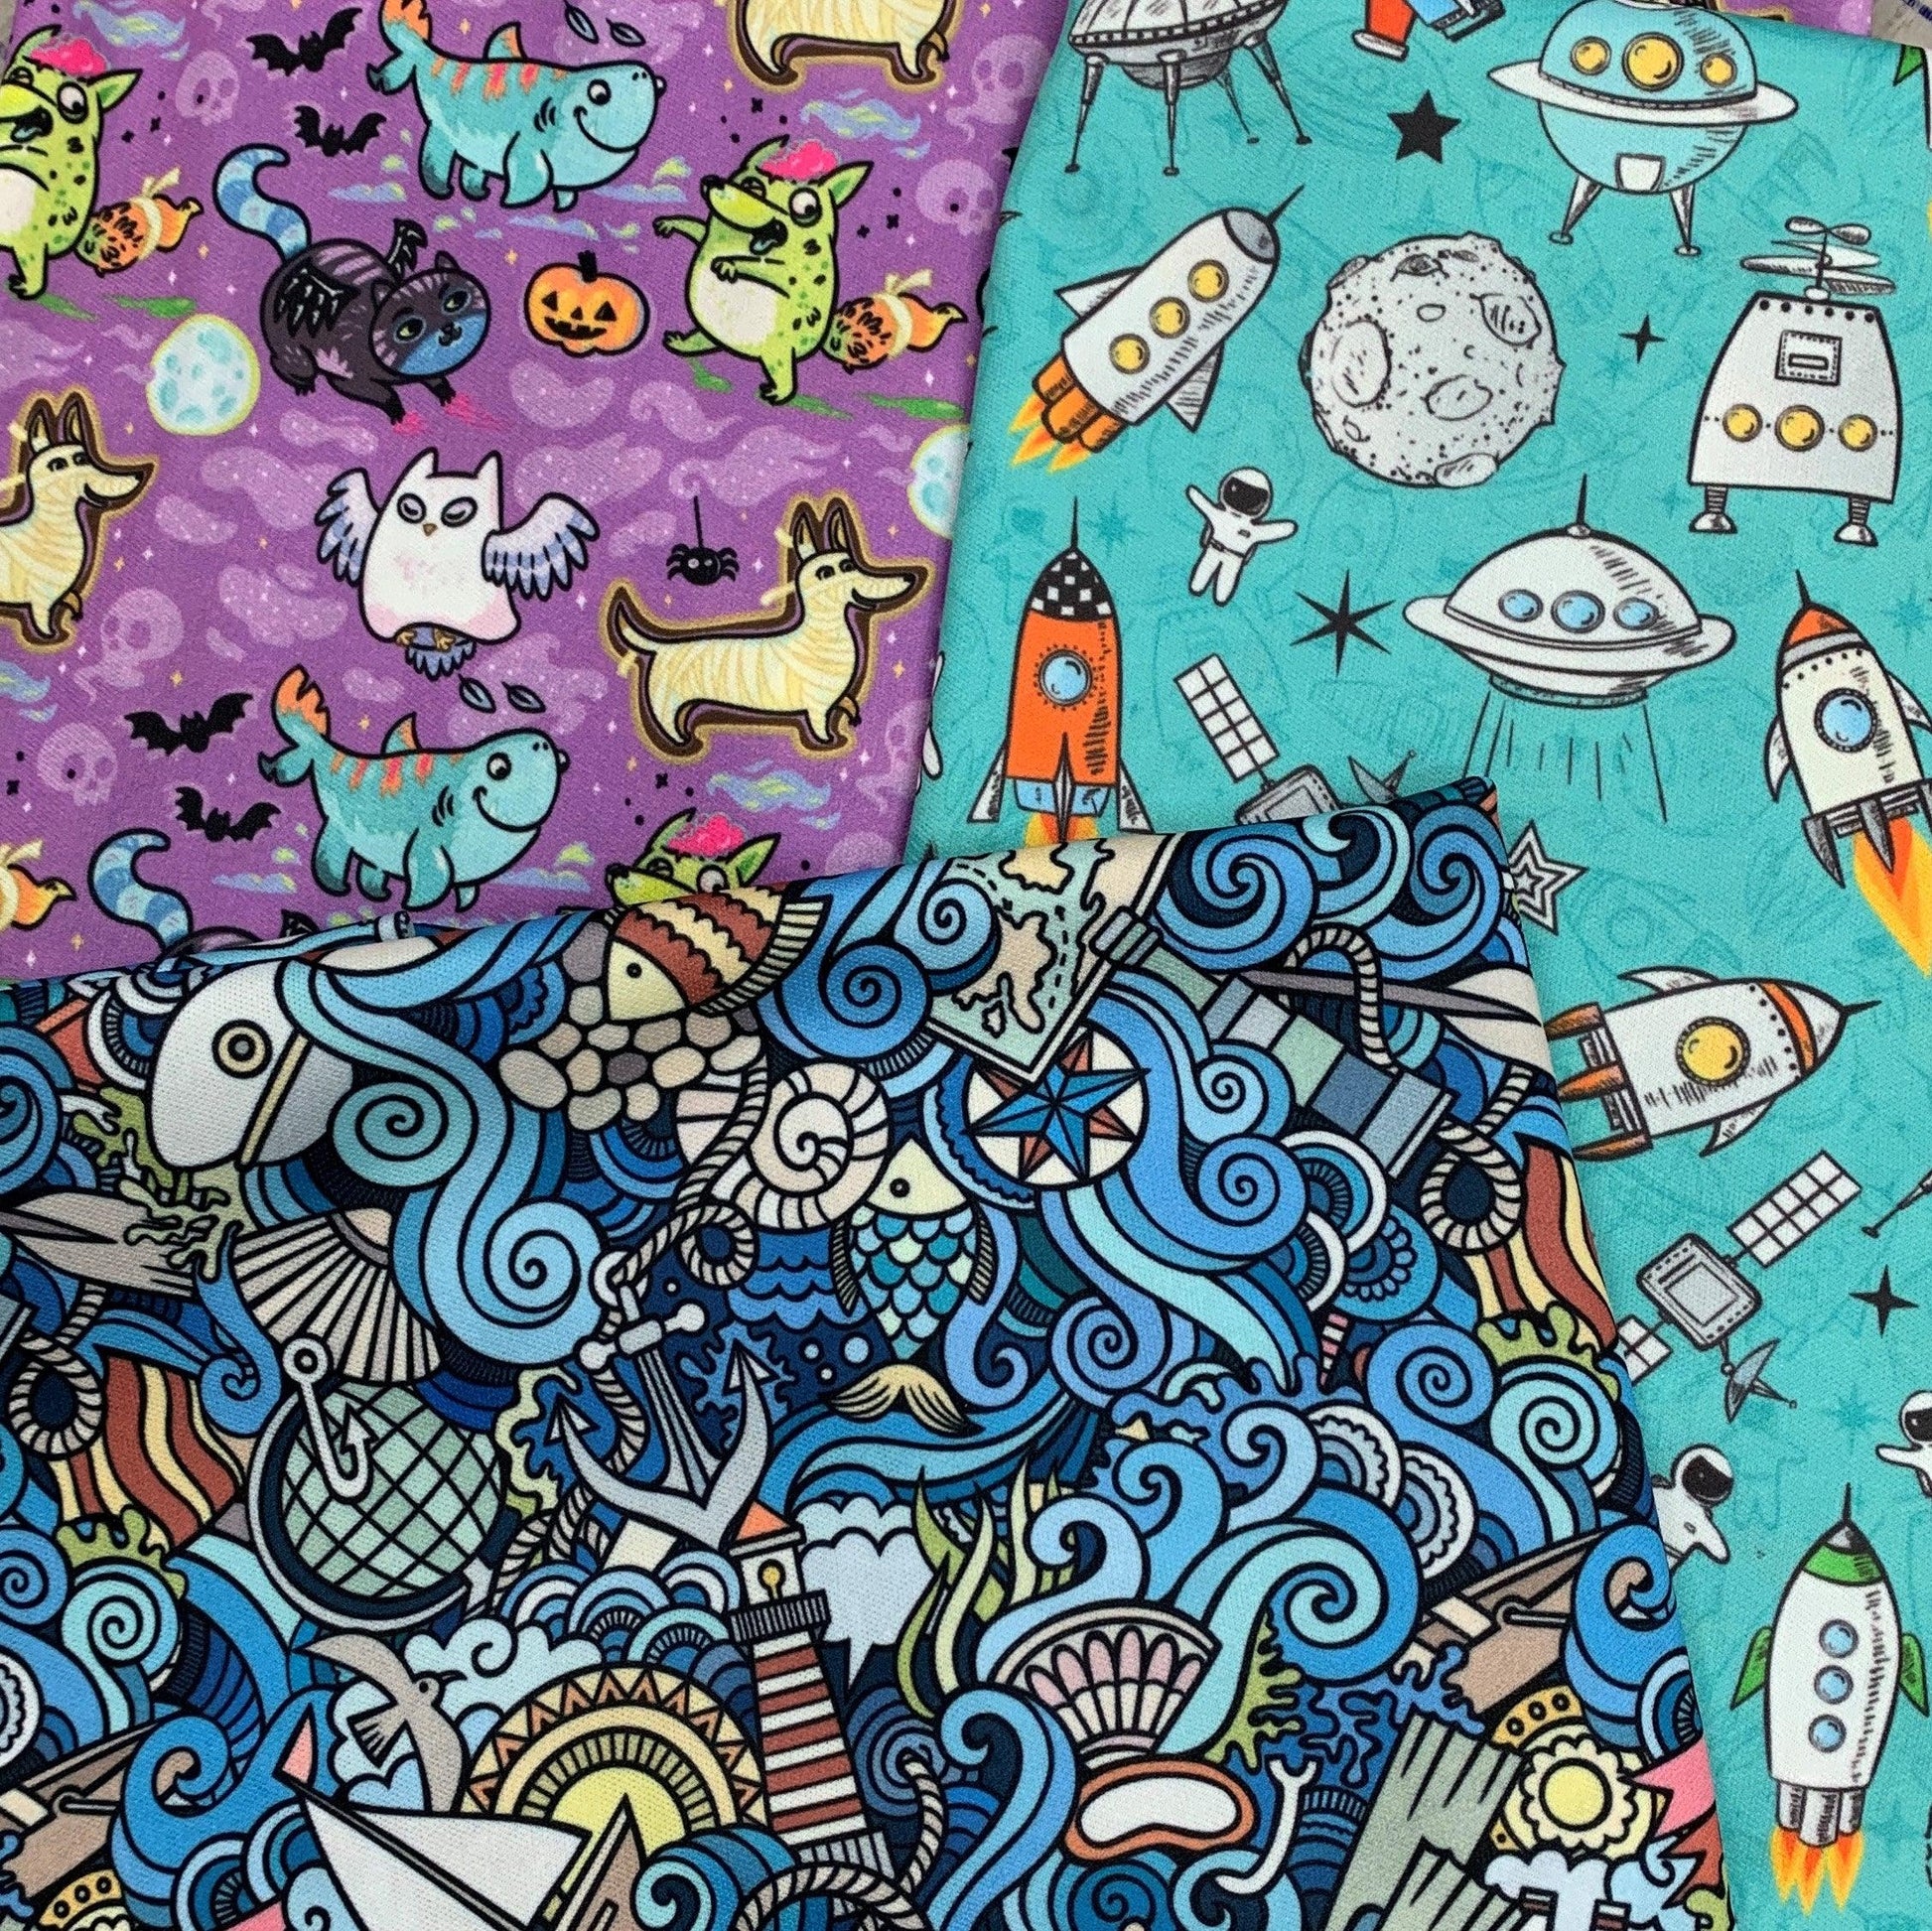 Polyester 1 MIL PUL Fabric, $15.25/yd, 15 Yards - Your Choice of One Print - Nature's Fabrics